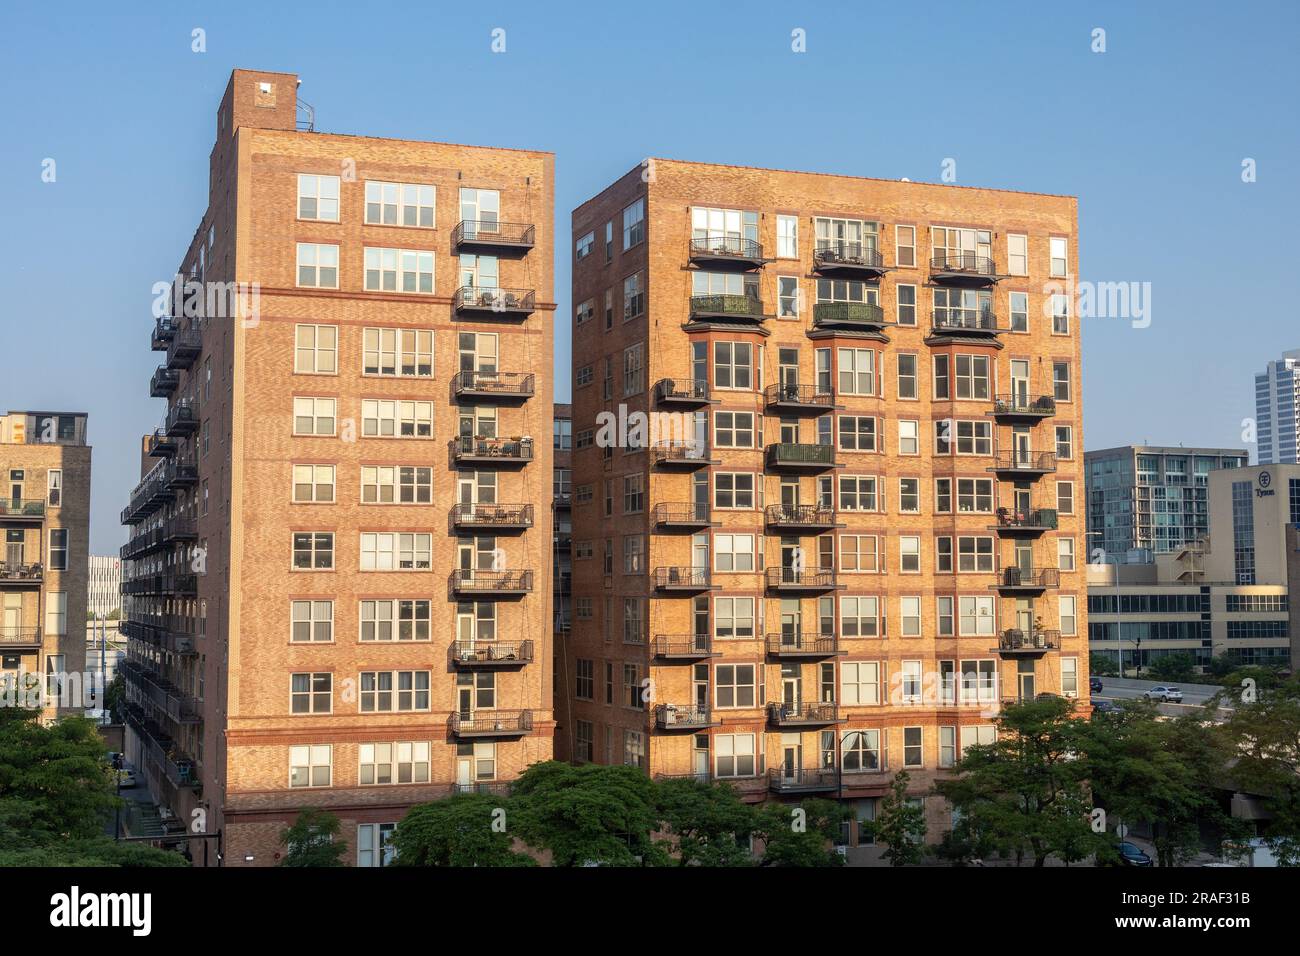 Older Chicago Apartment Buildings In The Clinton Area Of Chicago By The Interstate 290 Highway. Chicago USA Stock Photo